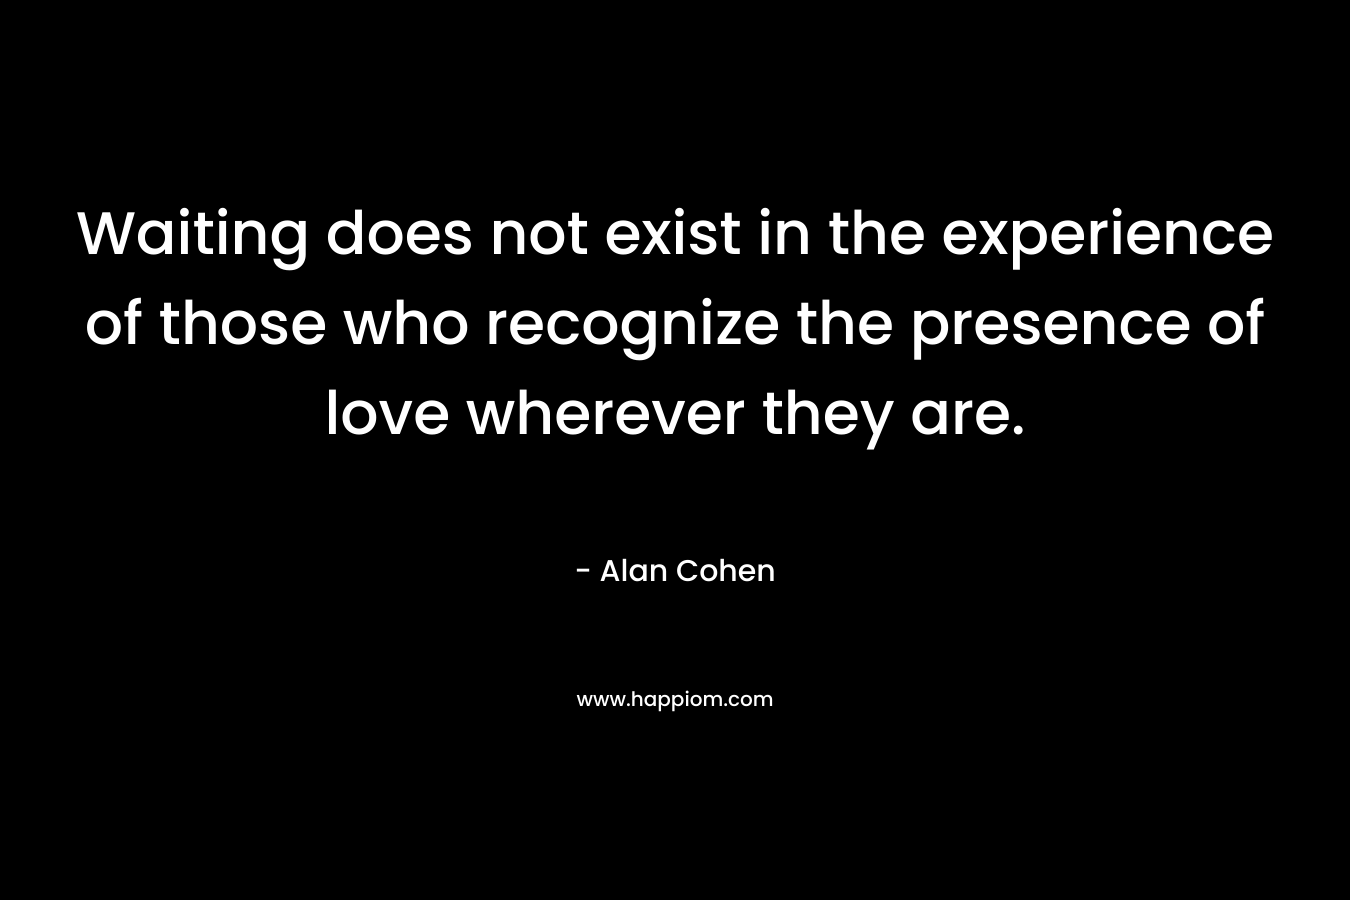 Waiting does not exist in the experience of those who recognize the presence of love wherever they are.